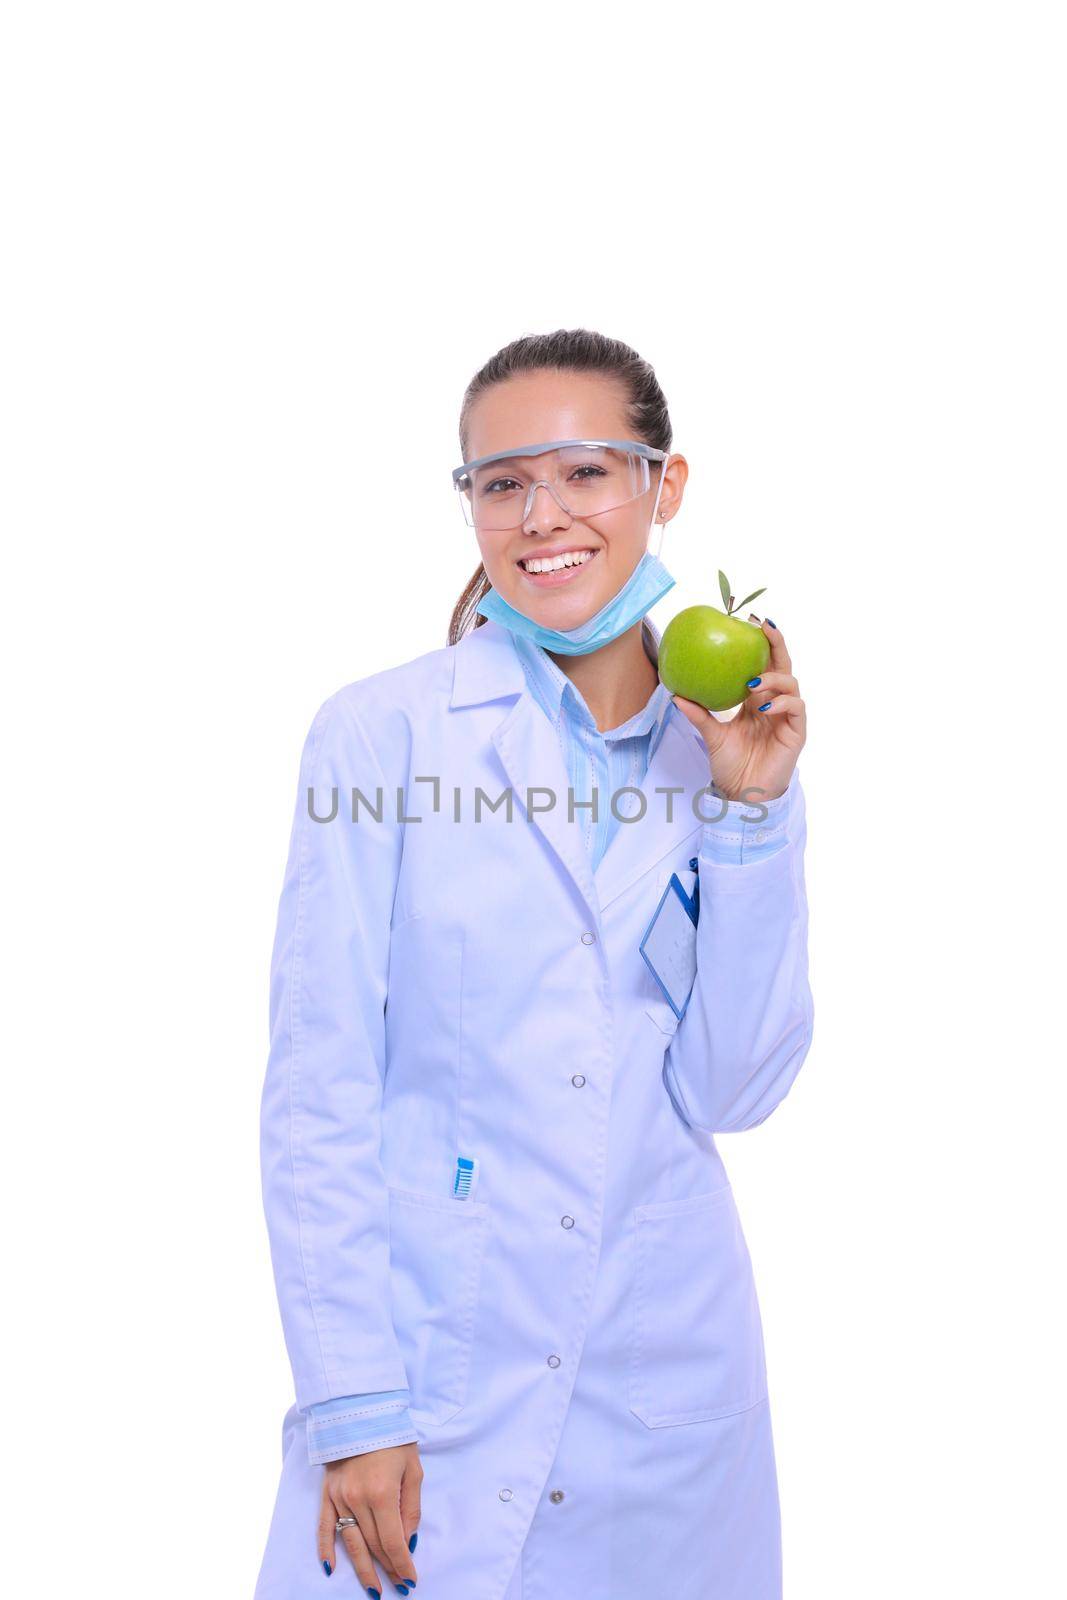 Dentist medical doctor woman hold green fresh apple in hand and tooth brush. Dentist doctors. Woman doctors by lenetstan